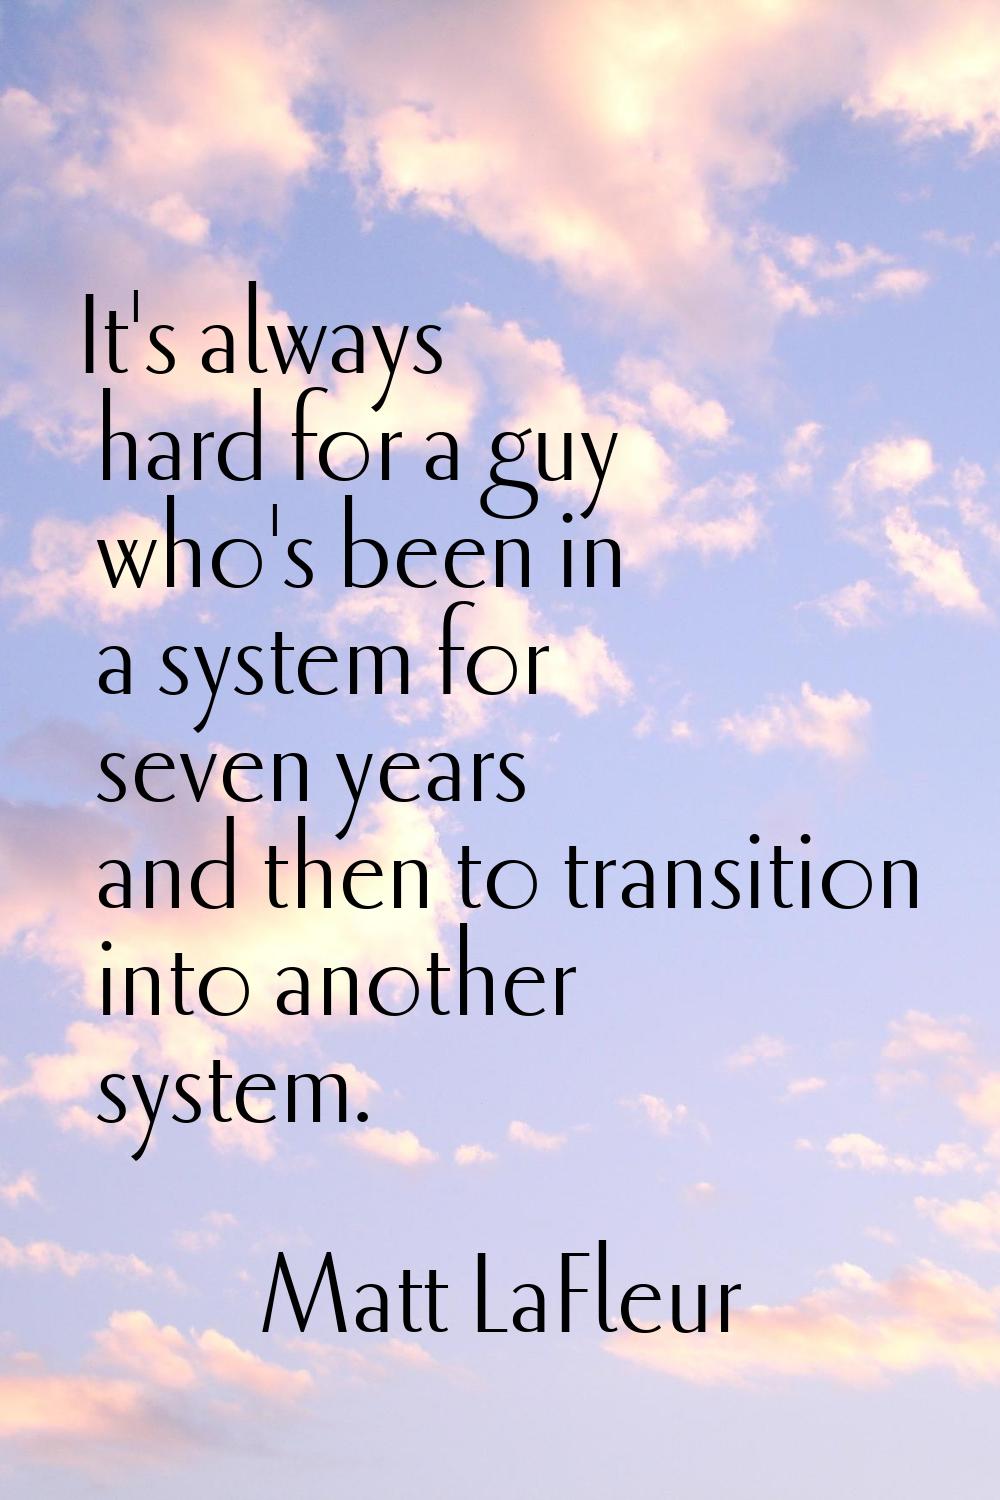 It's always hard for a guy who's been in a system for seven years and then to transition into anoth